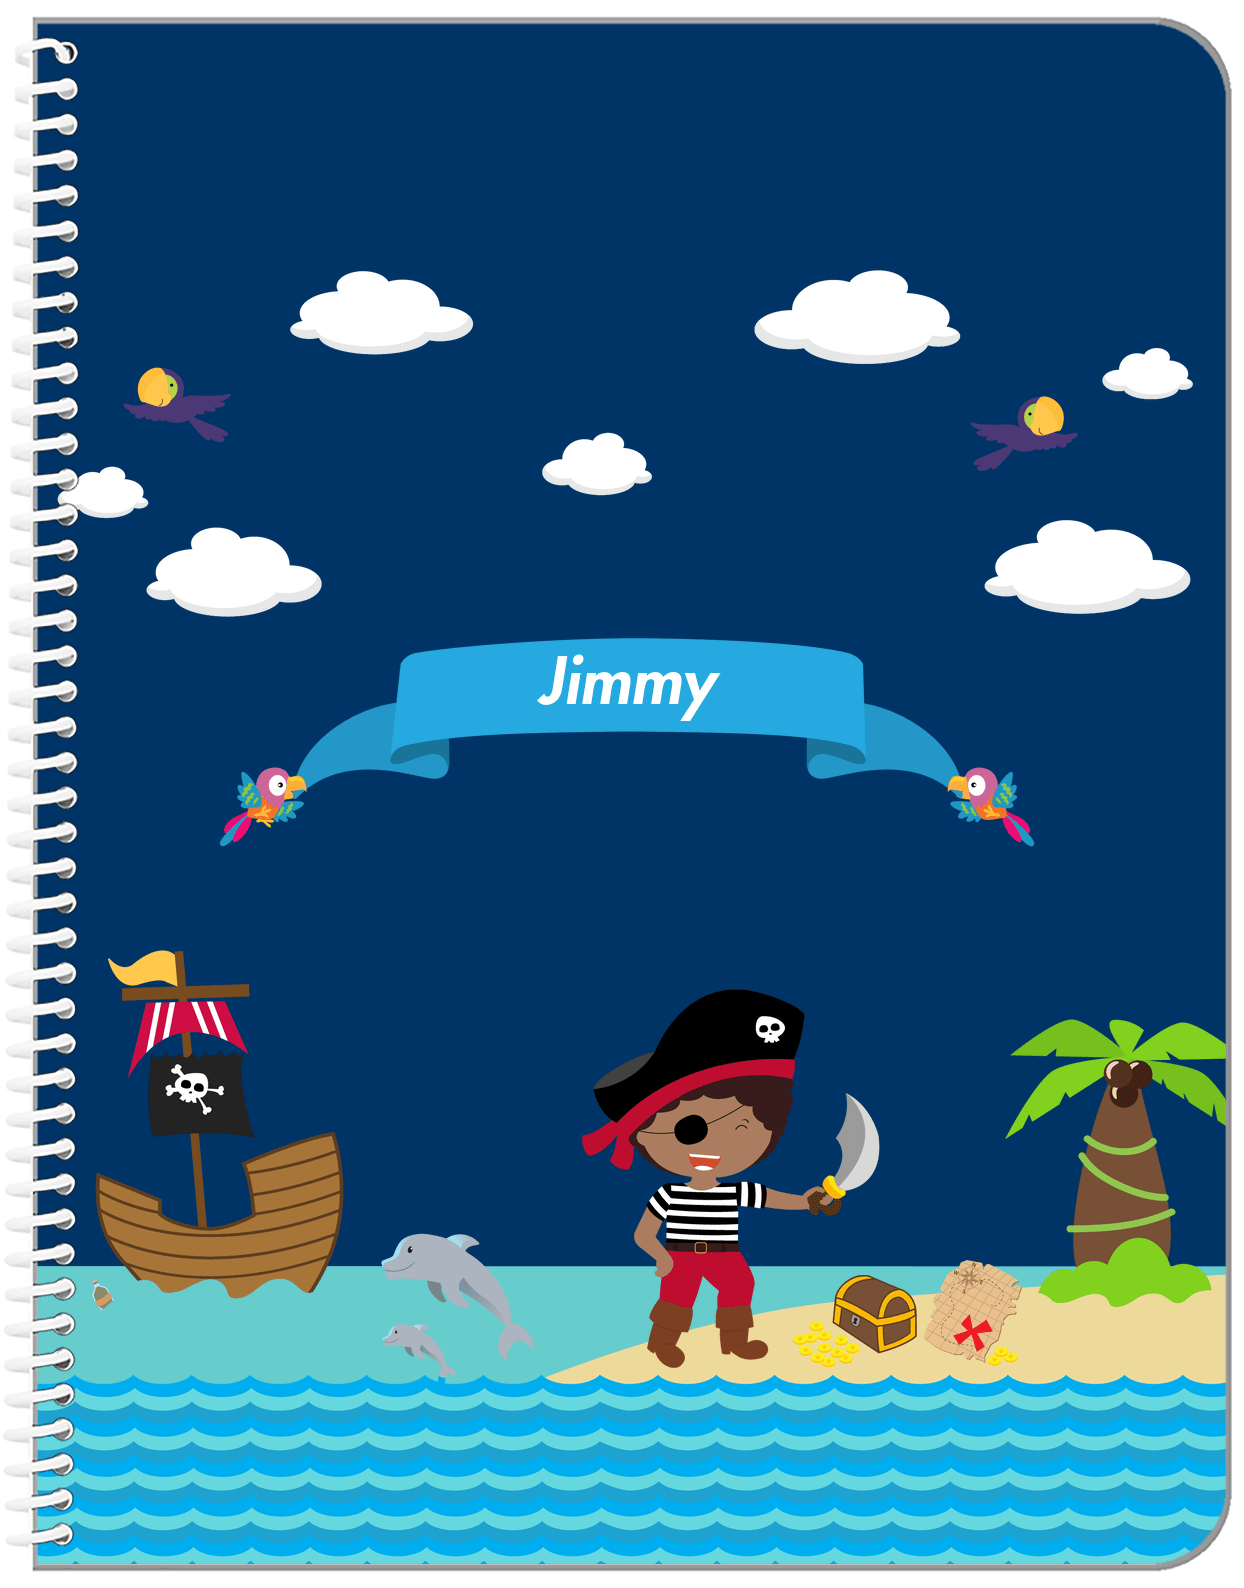 Personalized Pirate Notebook IV - Boy Pirate with Sword - Black Boy - Front View